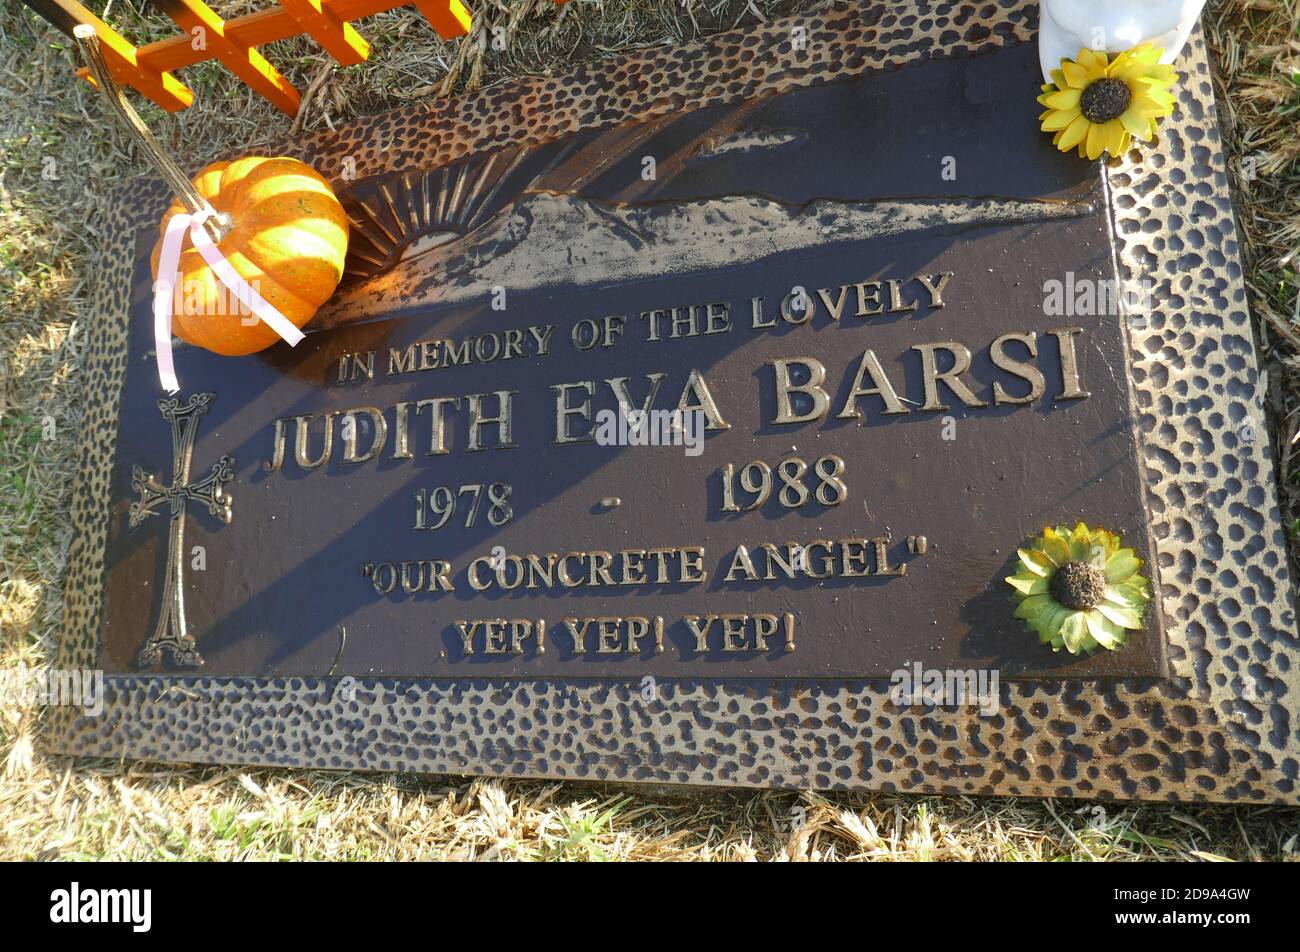 Los Angeles, California, USA 3rd November 2020 A general view of atmosphere of actress Judith Barsi's grave at Forest Lawn Hollywood Hills Memorial Park on November 3, 2020 in Los Angeles, California, USA. Photo by Barry King/Alamy Stock Photo Stock Photo